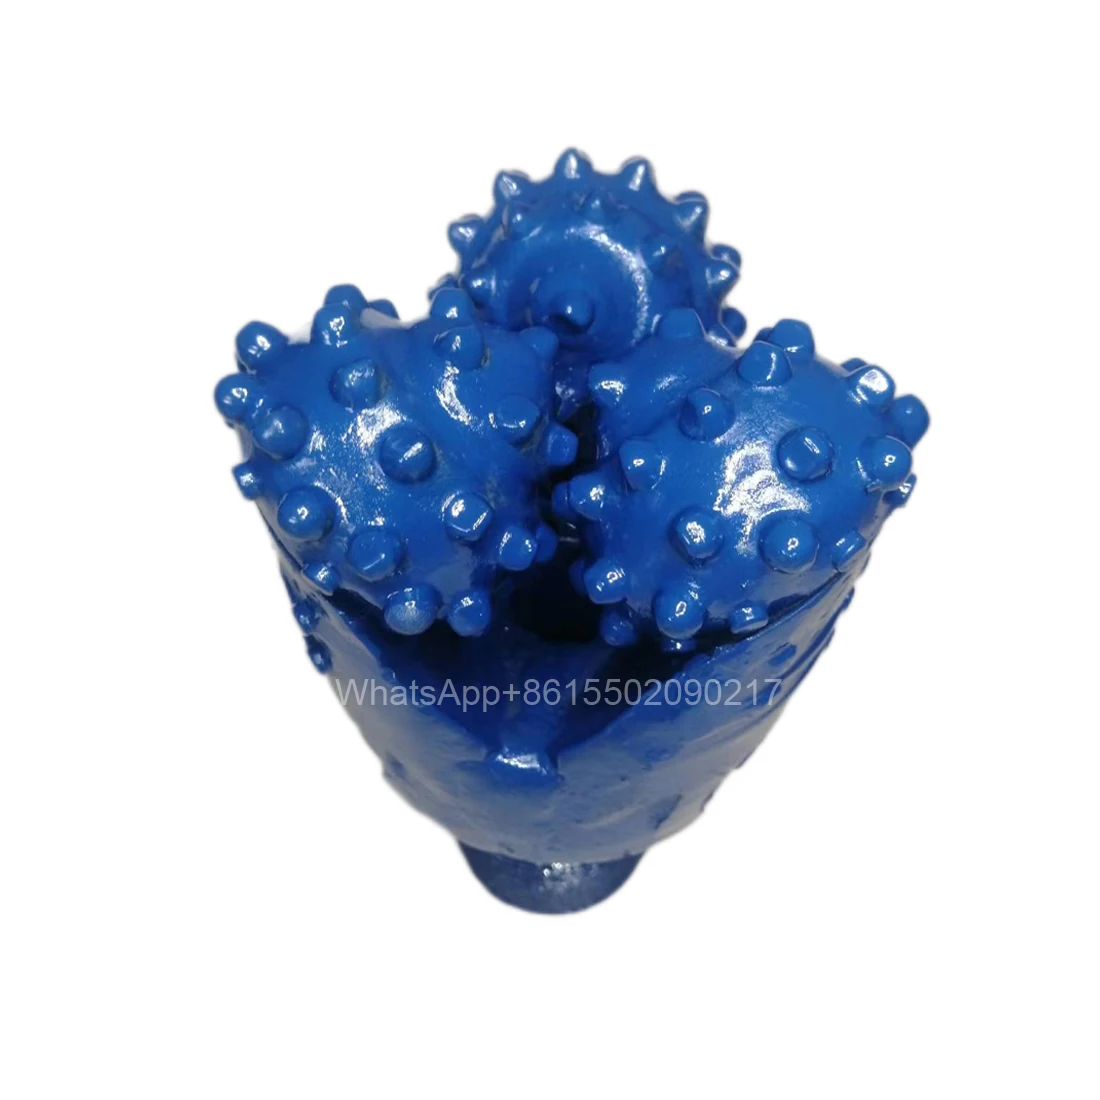 Insert Roller Cone Bits Drilling Water Well Bits Tricone Bits with Tungsten Carbide or Steel Inserts